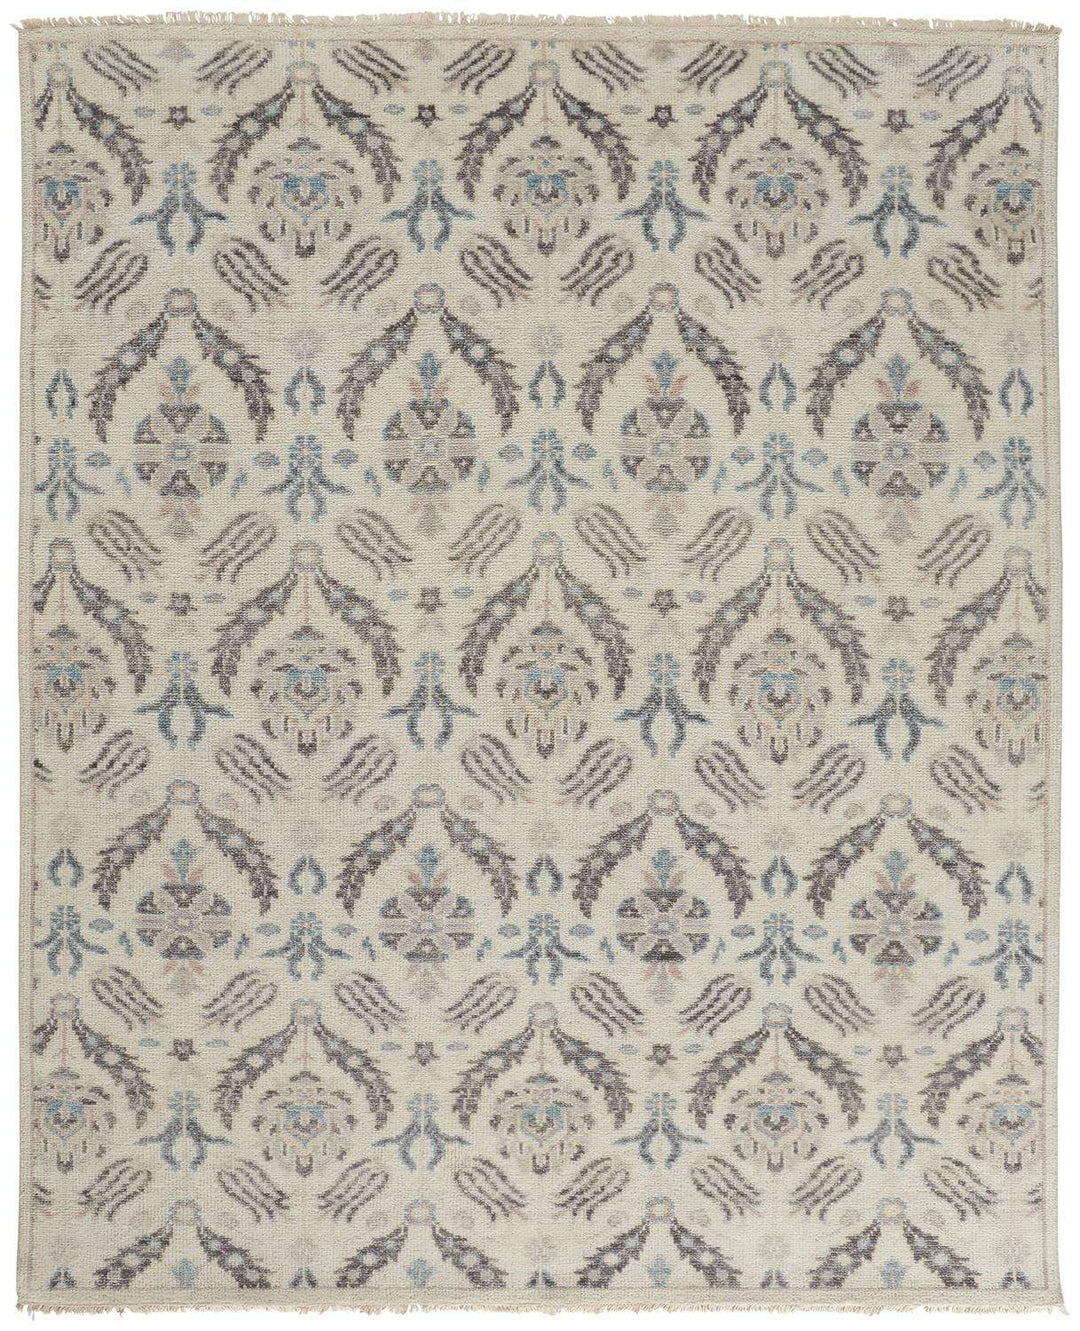 Feizy Feizy Beall Luxury Wool Arts and Crafts Rug - Beige - Available in 8 Sizes 3'-6" x 5'-6" BEA6711FBGE000C50